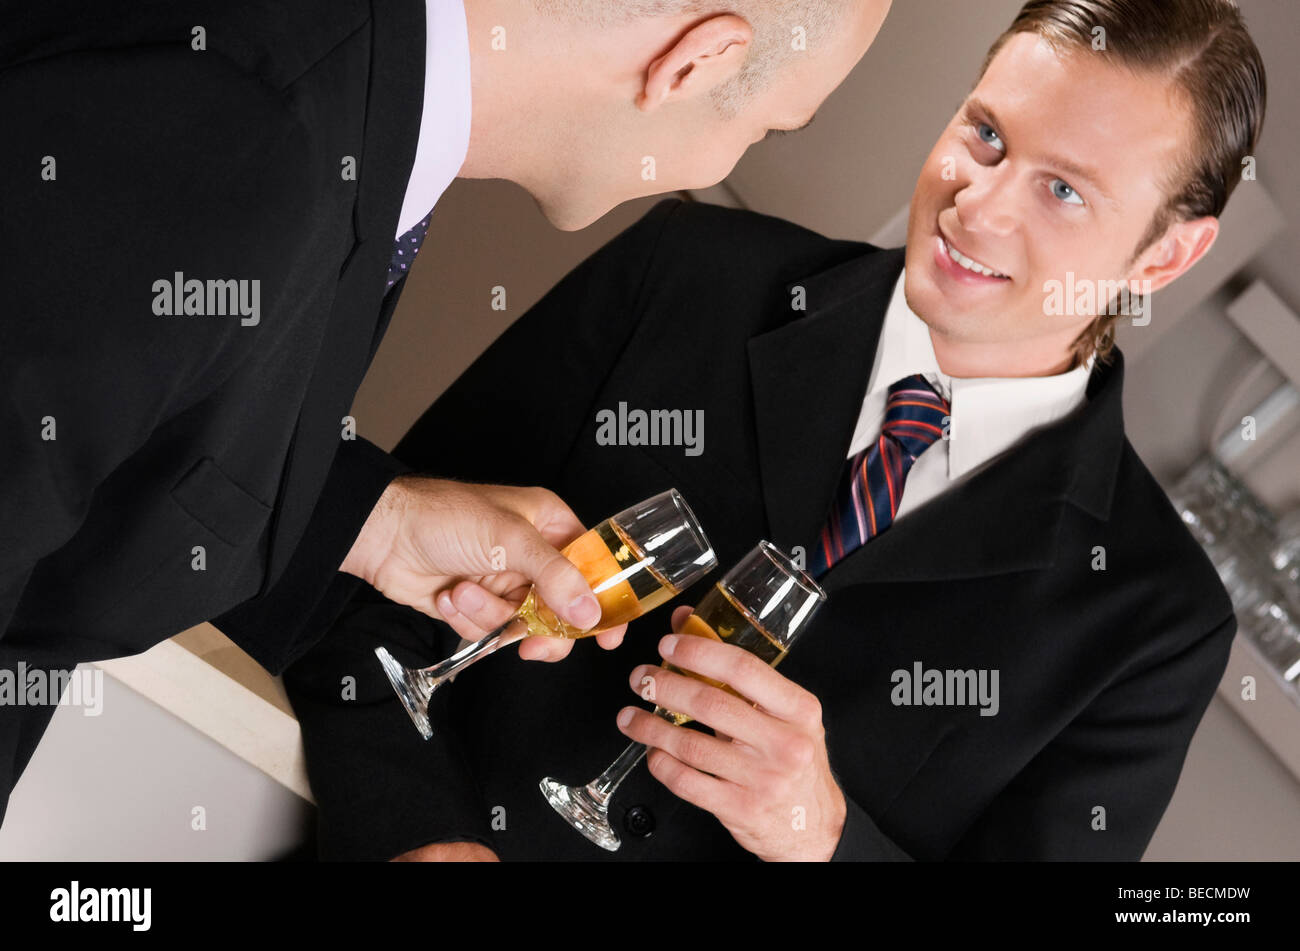 Businessmen toasting with wine in a bar Stock Photo